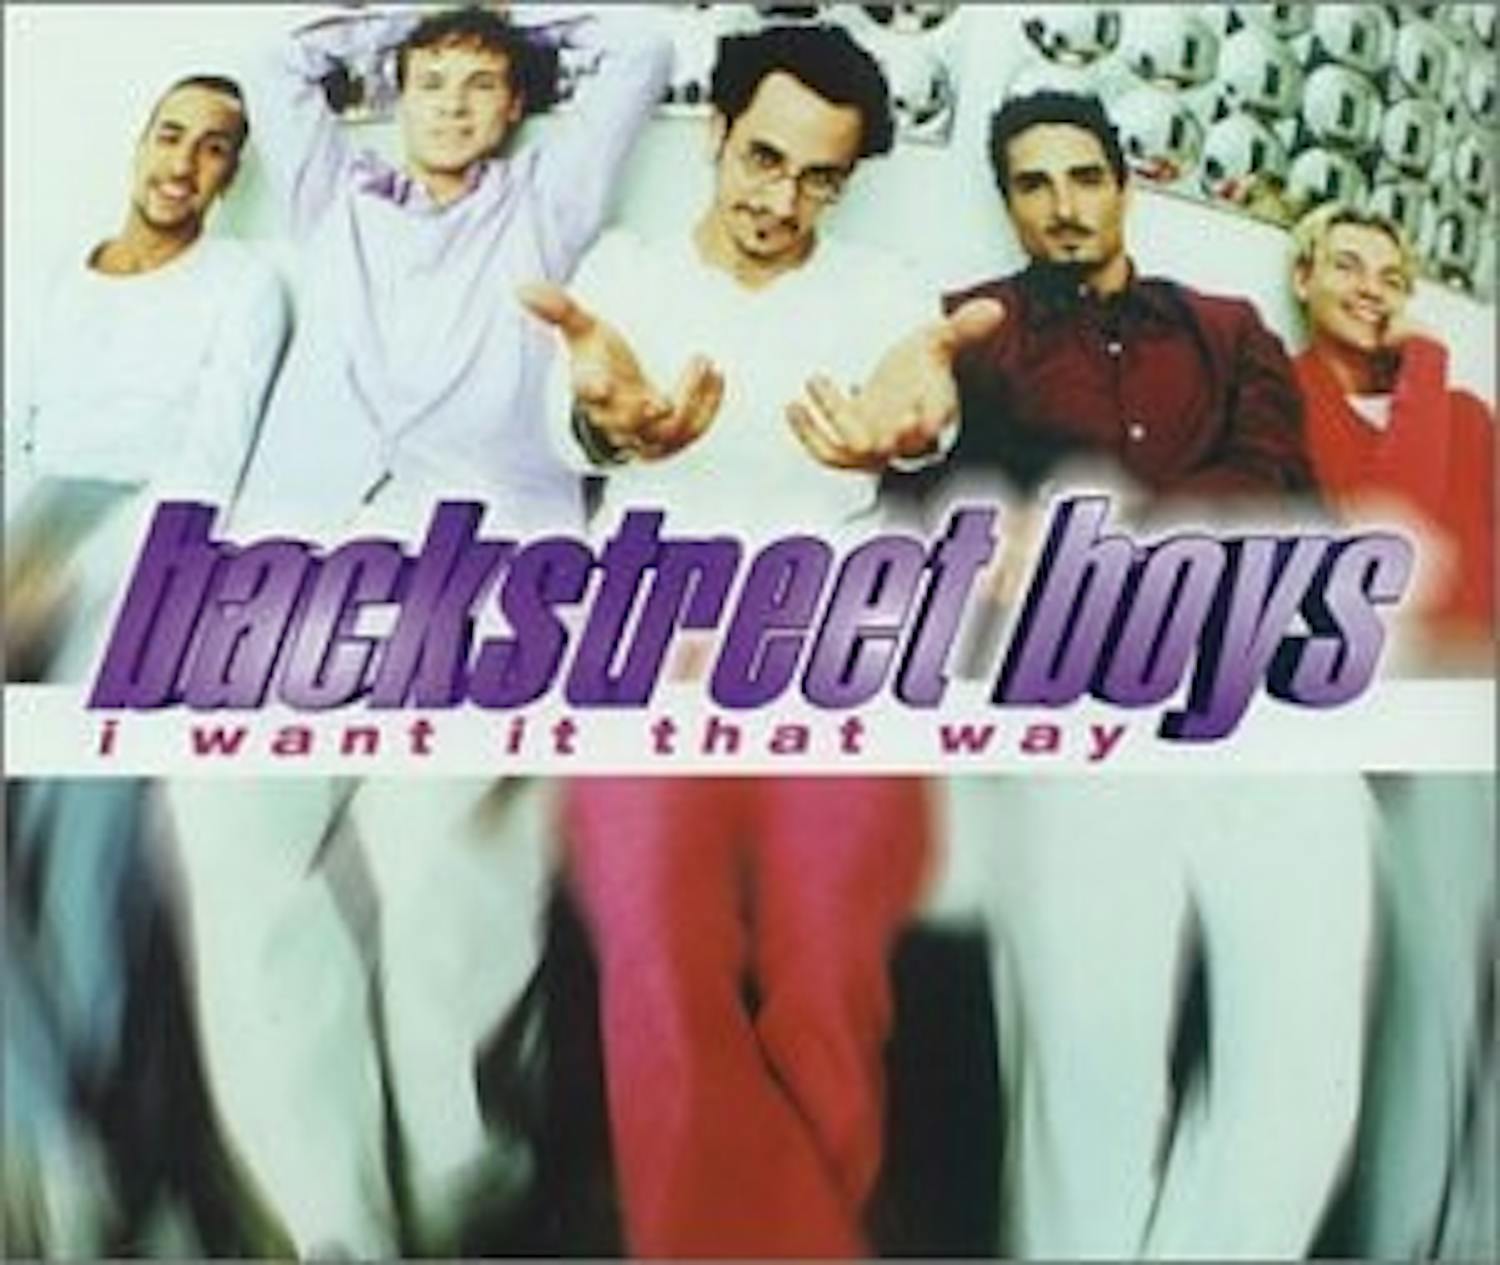 	Matt on Music’s 15 favorite songs of the ’90s includes the Backstreet Boys hit ‘I Want It That Way” (1999) at No. 4 and Kris Kross’ 1992 hit ‘Jump’ at No. 15.